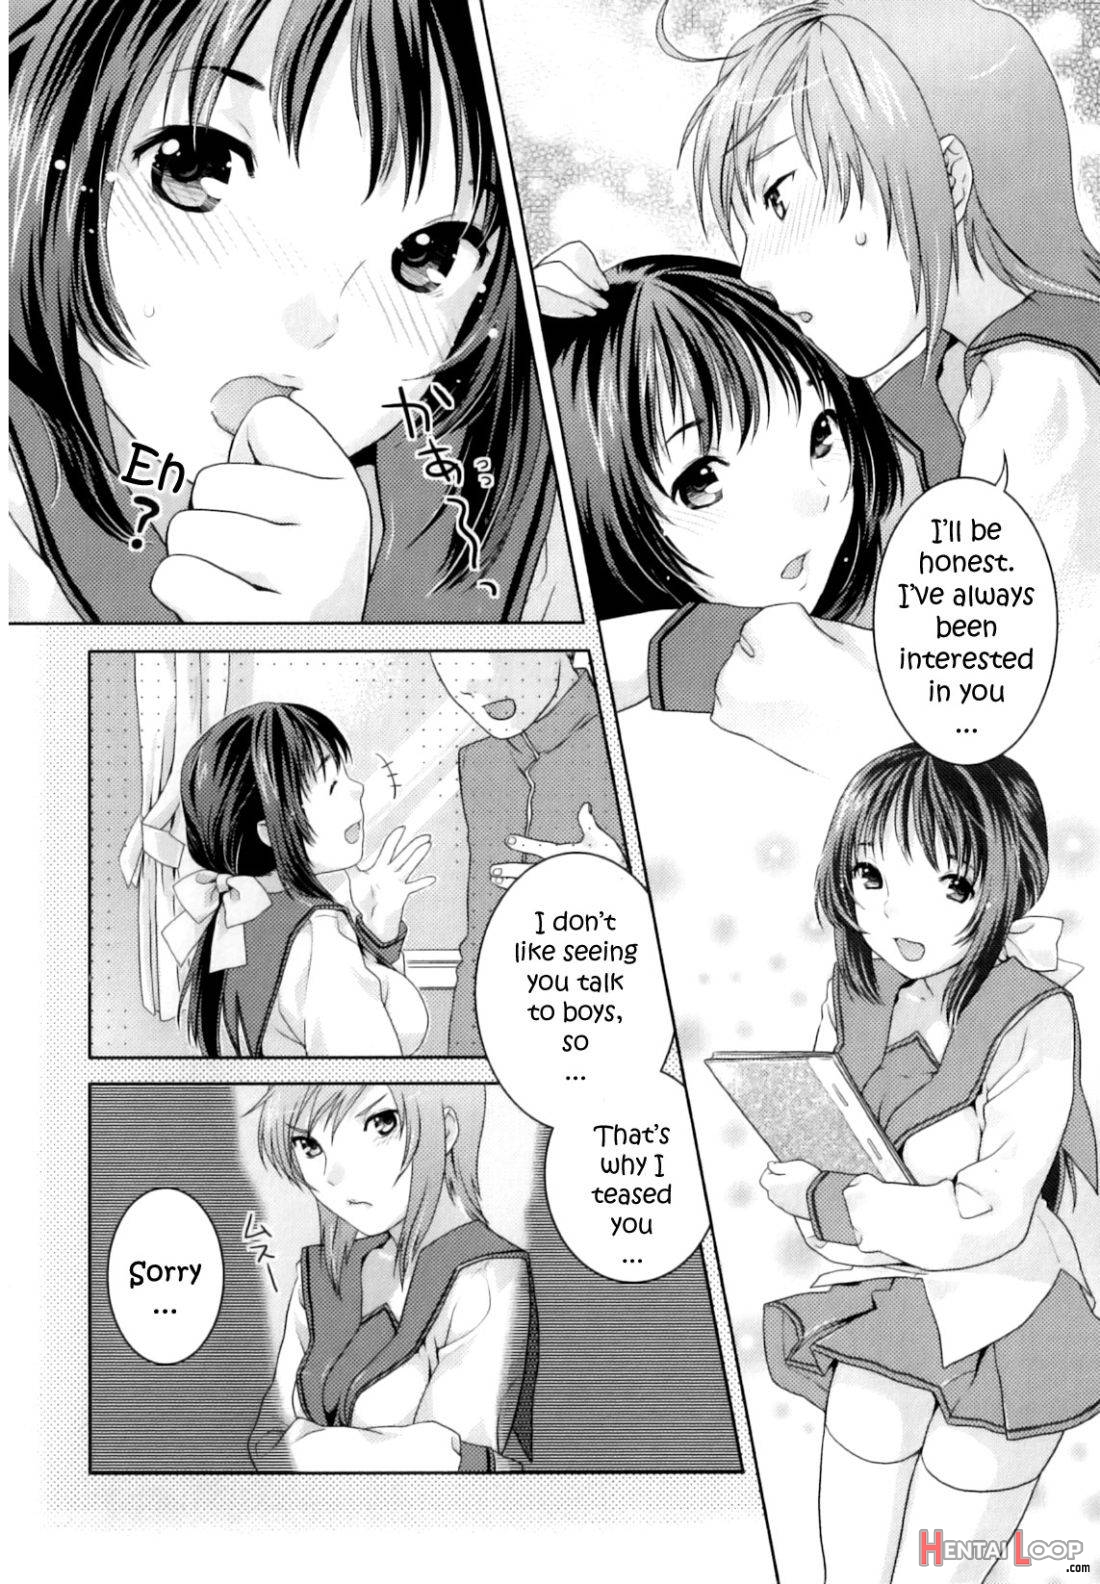 Their Relation page 6